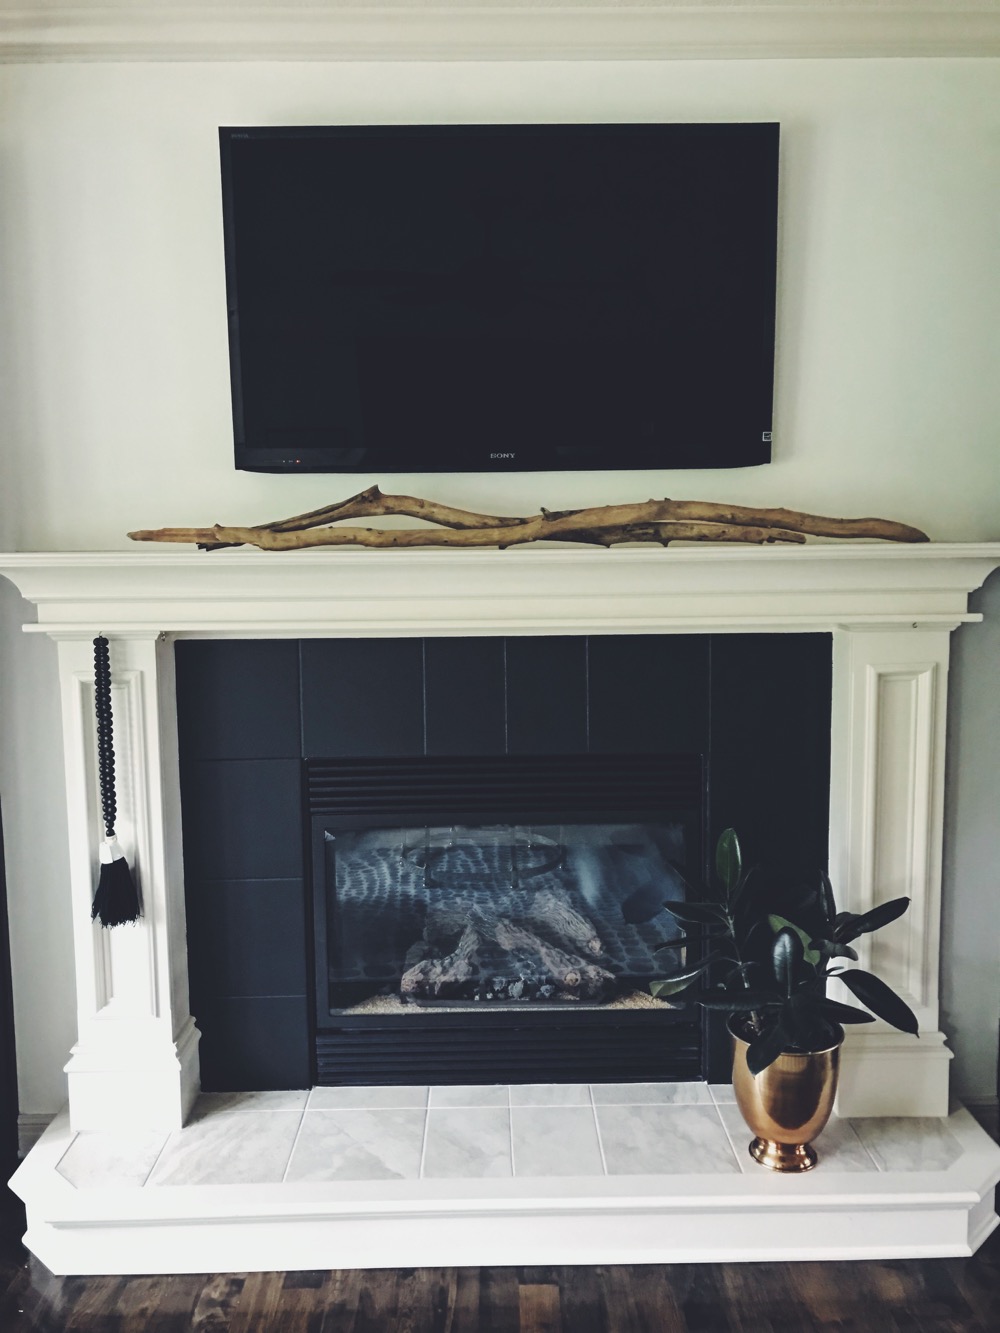 Painted Tile Around Fireplace Life, How To Remove And Replace Tile Around Fireplace